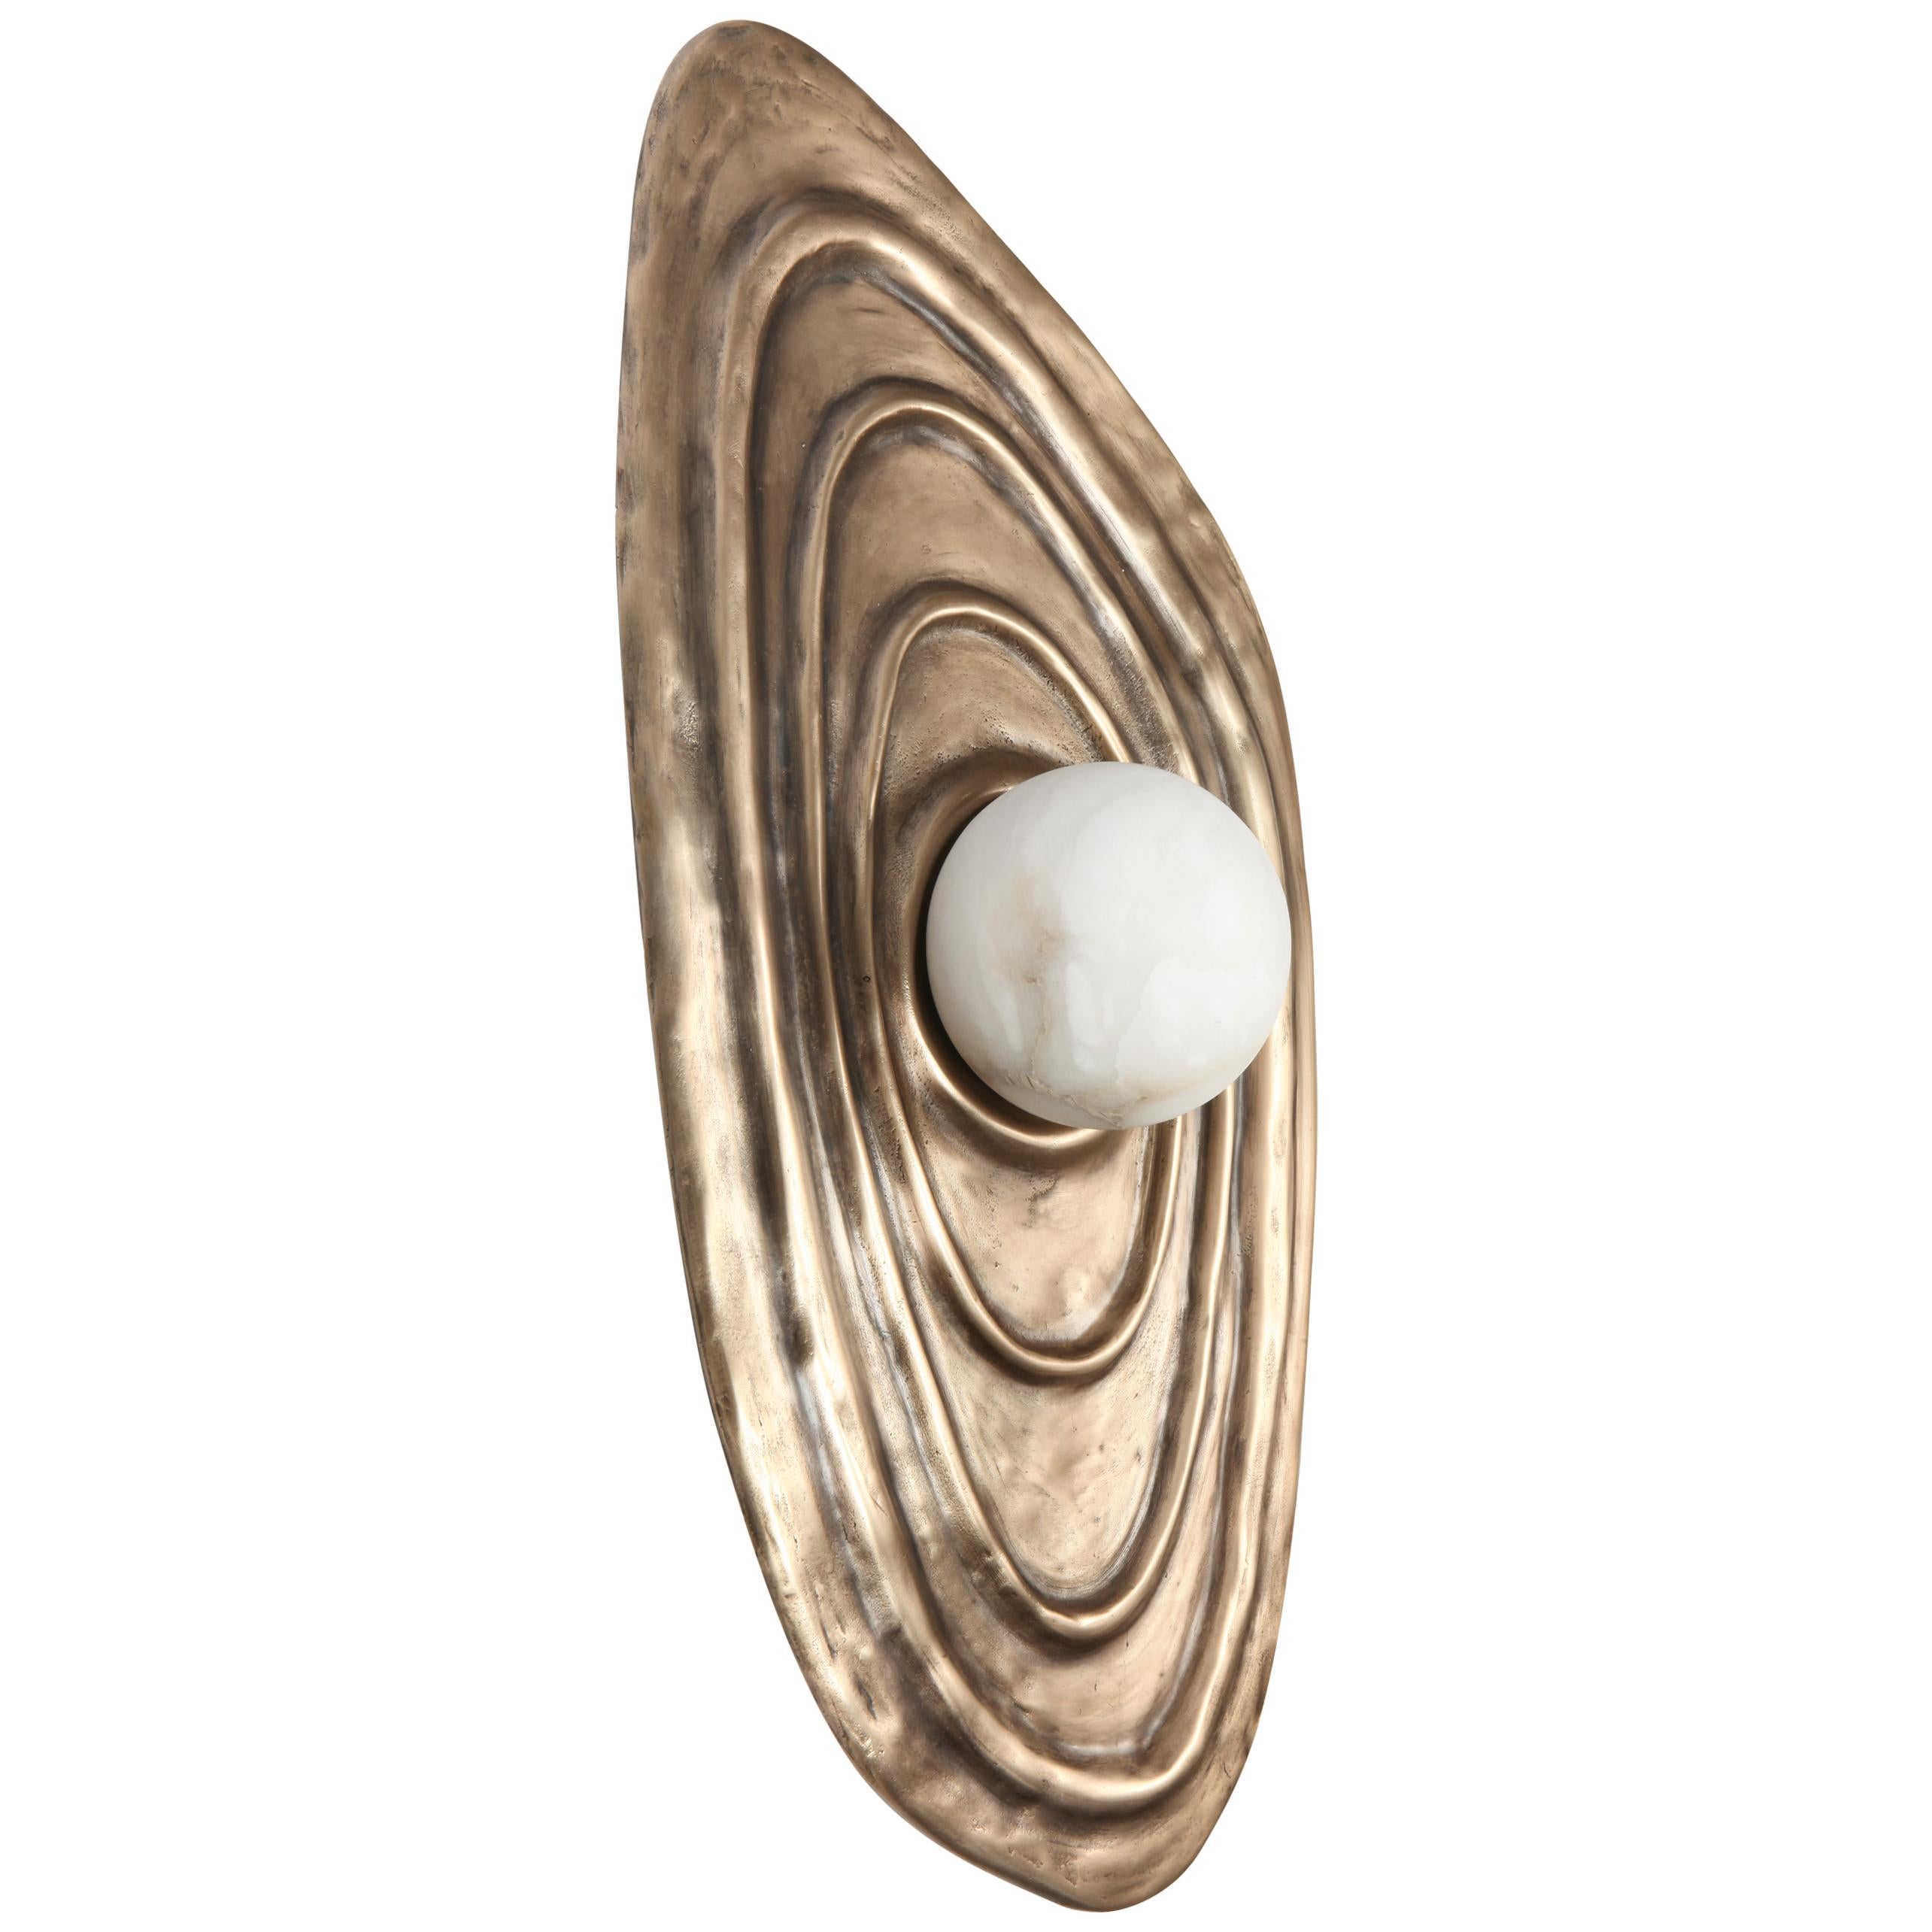 Designed and created by Charles Burnand Studio, the organic shape of the perla wall sconce was inspired by the lines of Japanese gardens with the subtle undulations of the interior of a shell. Cast in bronze the Perla wall sconce can be patinated to